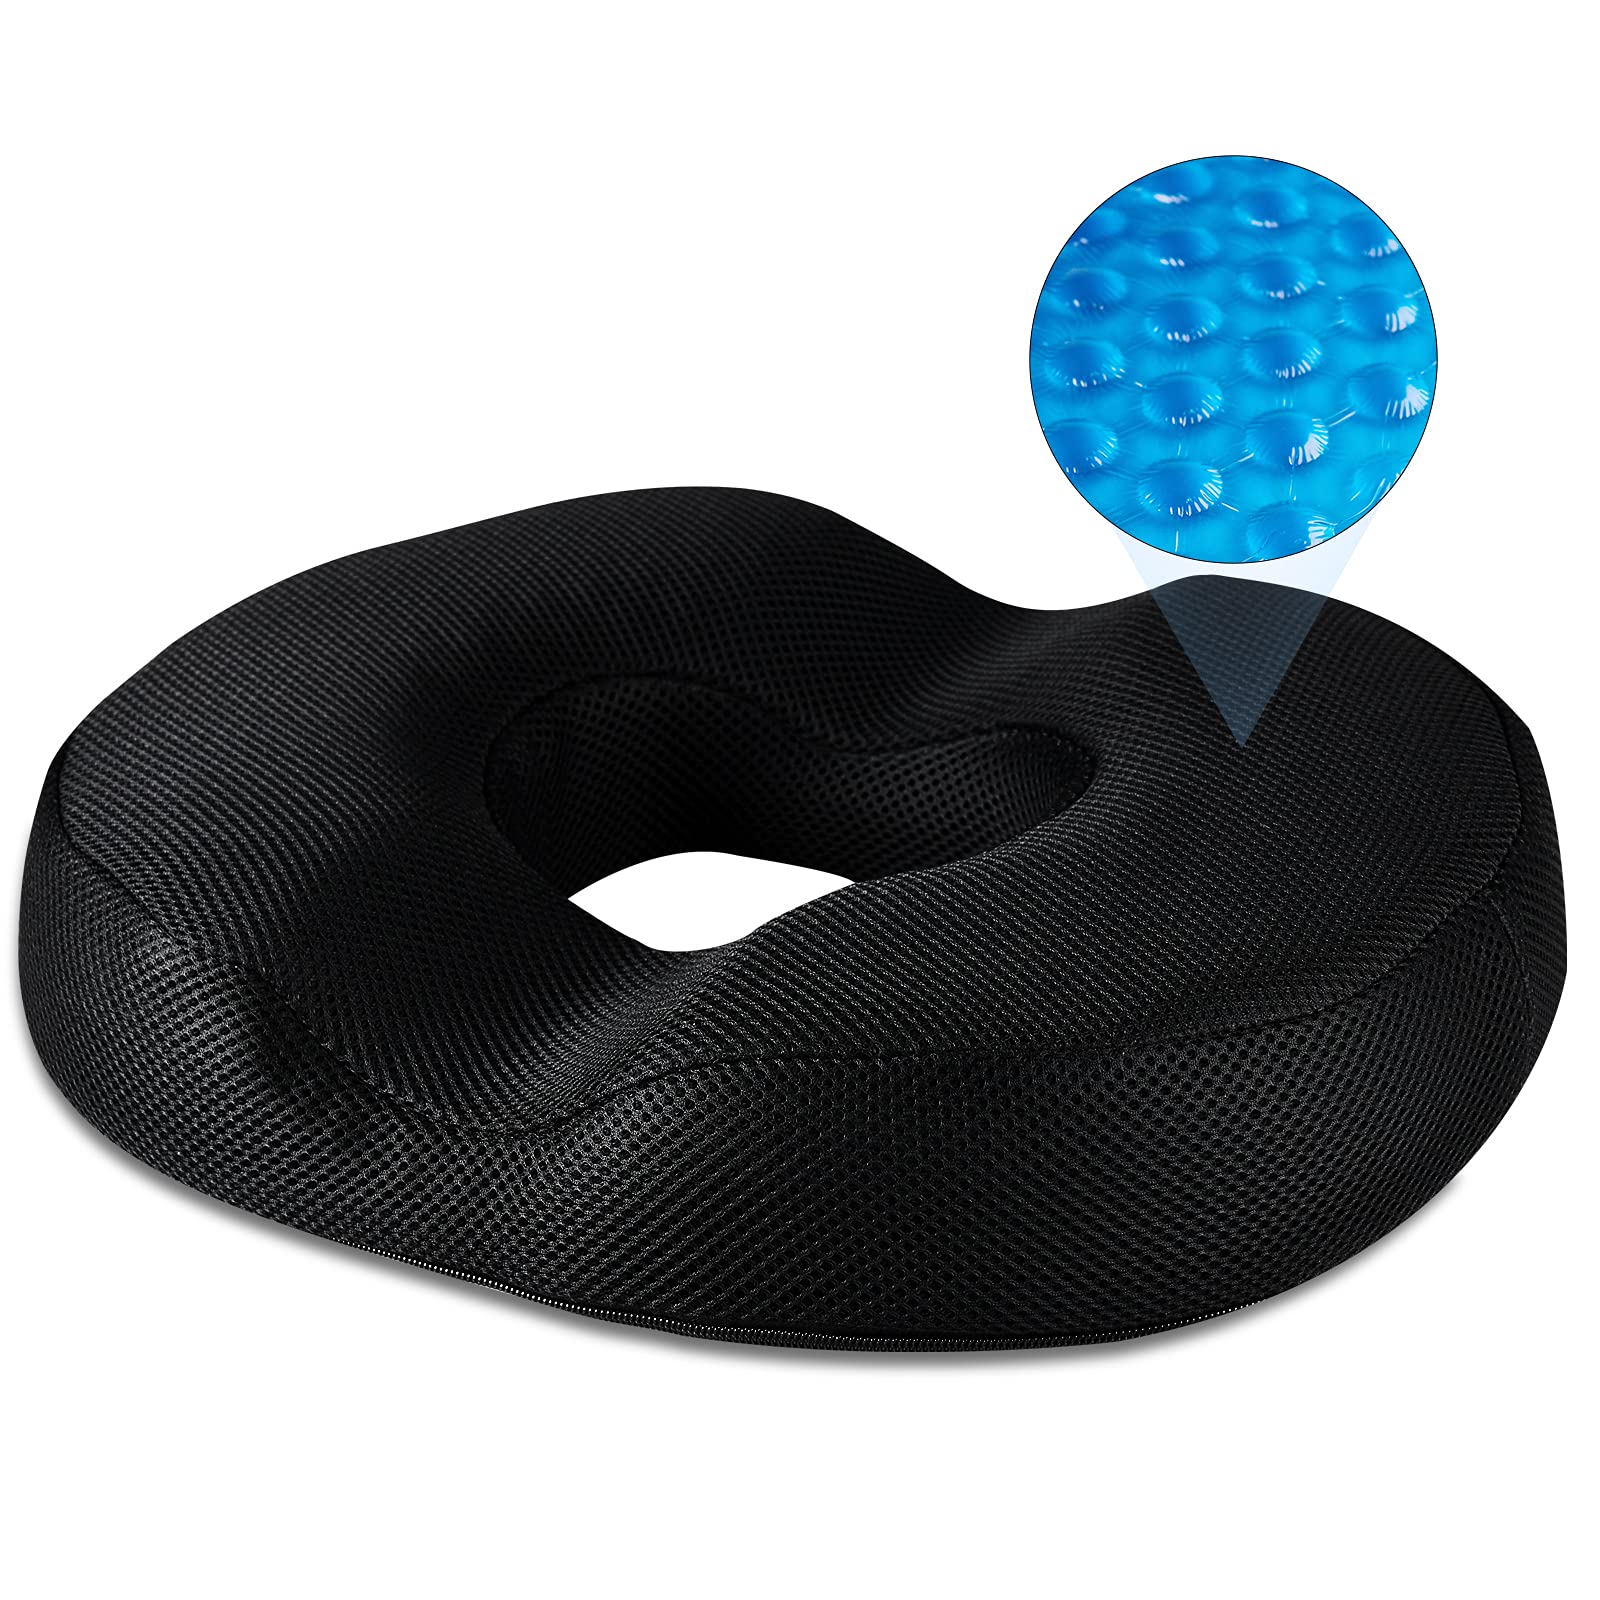 Donut Pillow, Breathable Sitting Pad for Tailbone Pain Pressure Sores